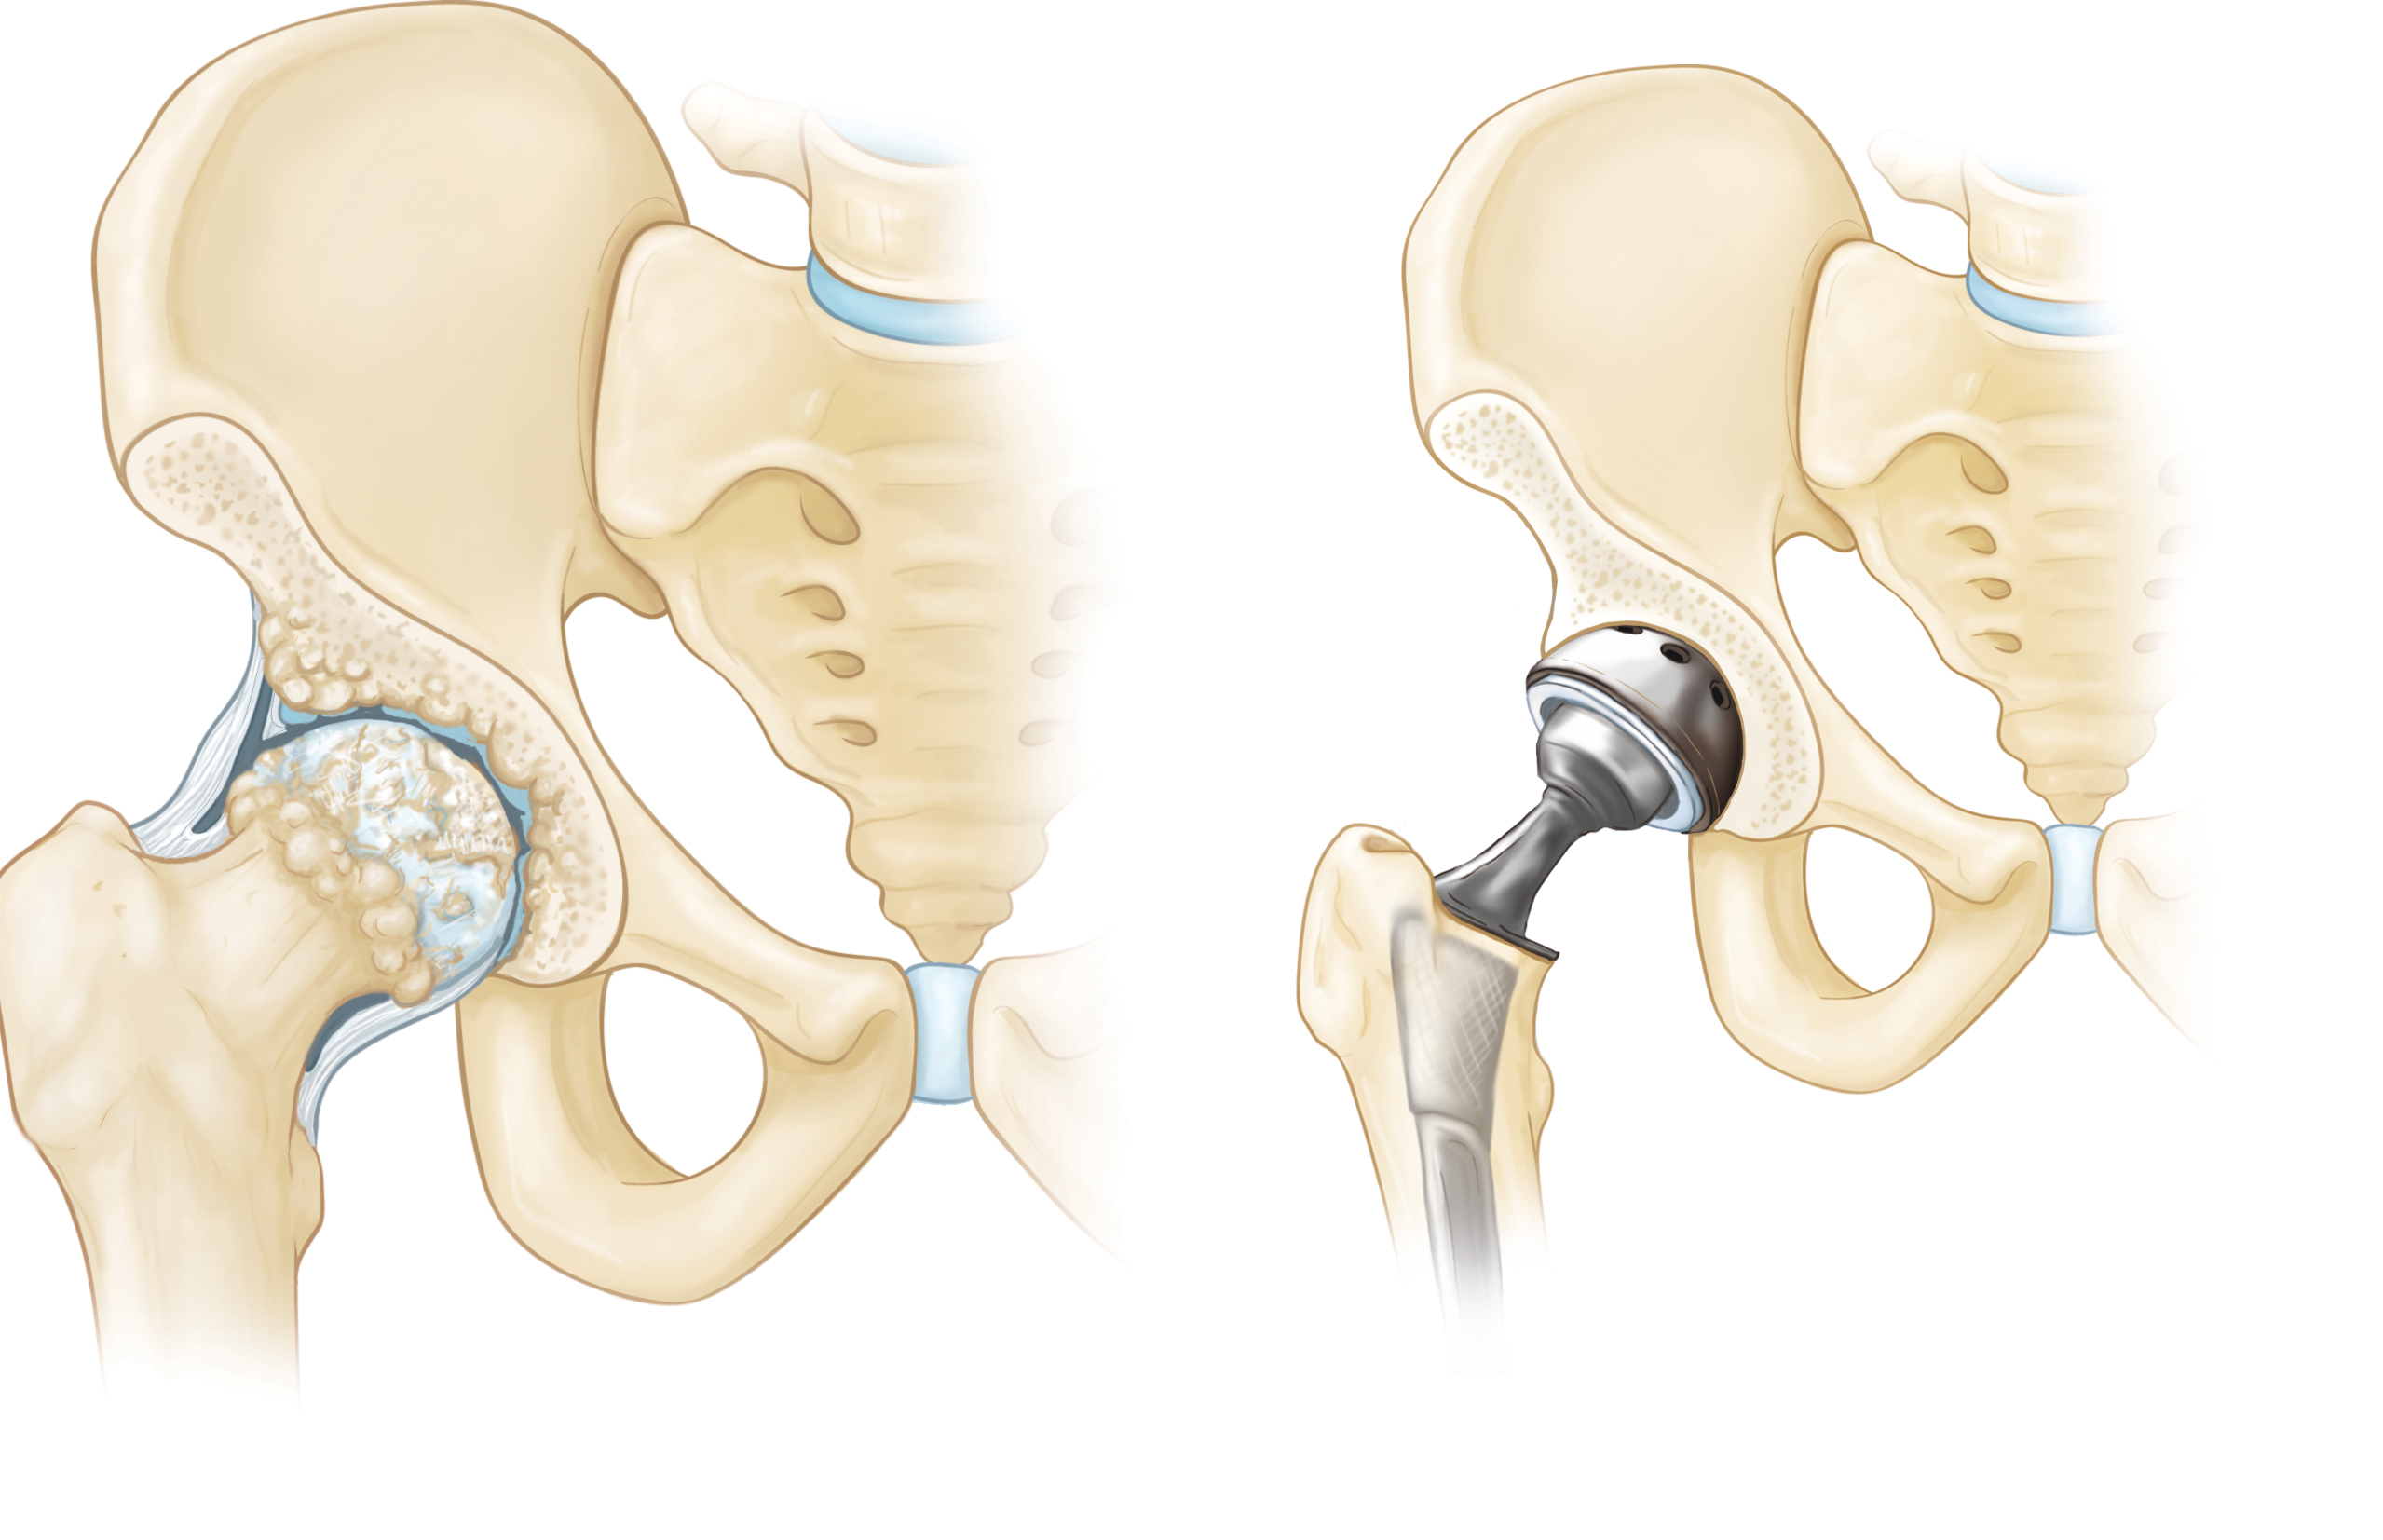 ip with osteoarthritis and hip with hip implant